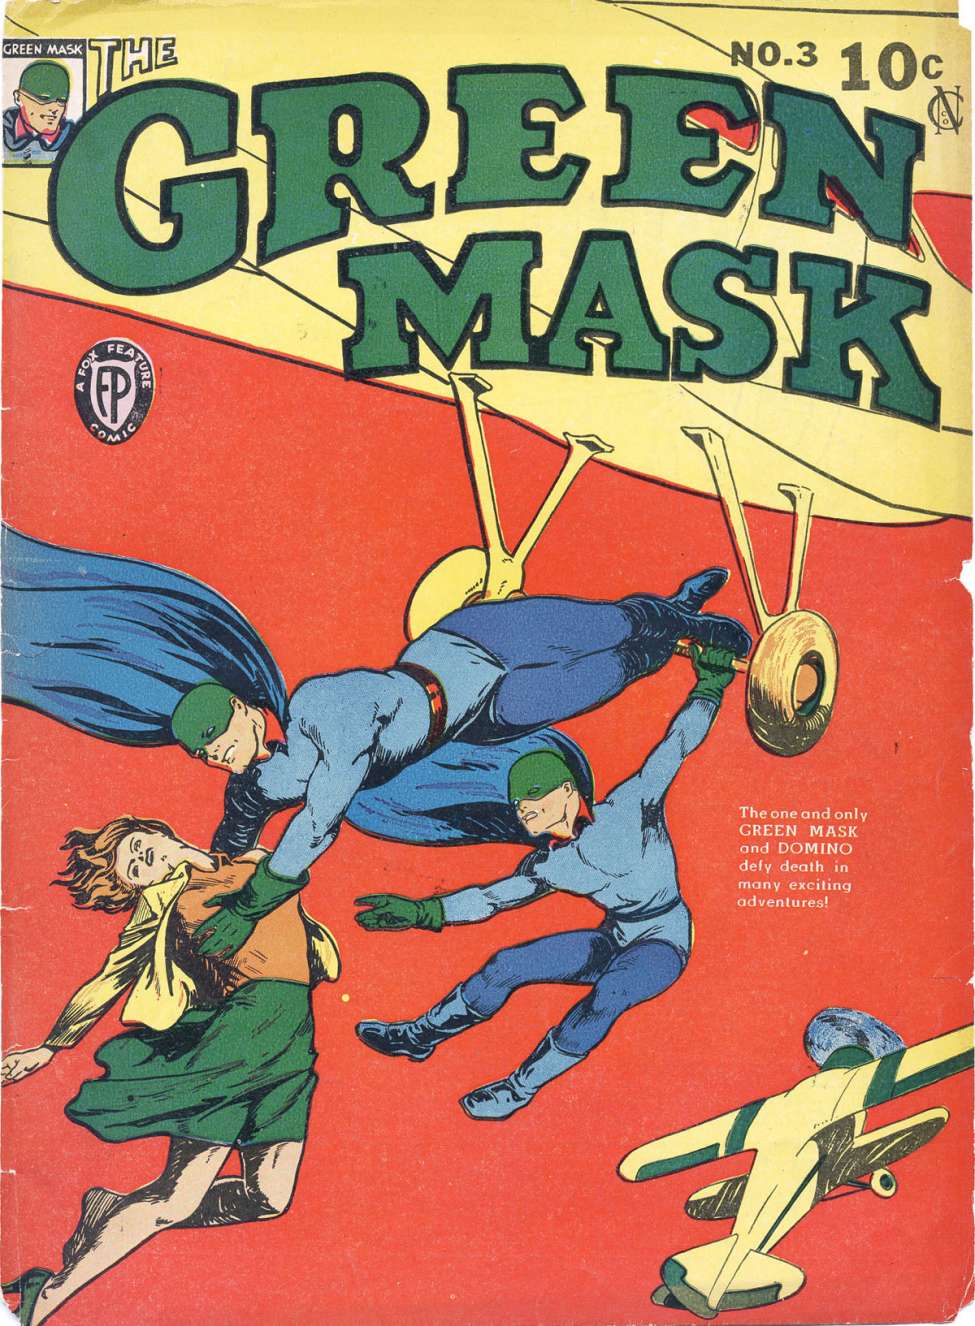 Comic Book Cover For The Green Mask v1 3